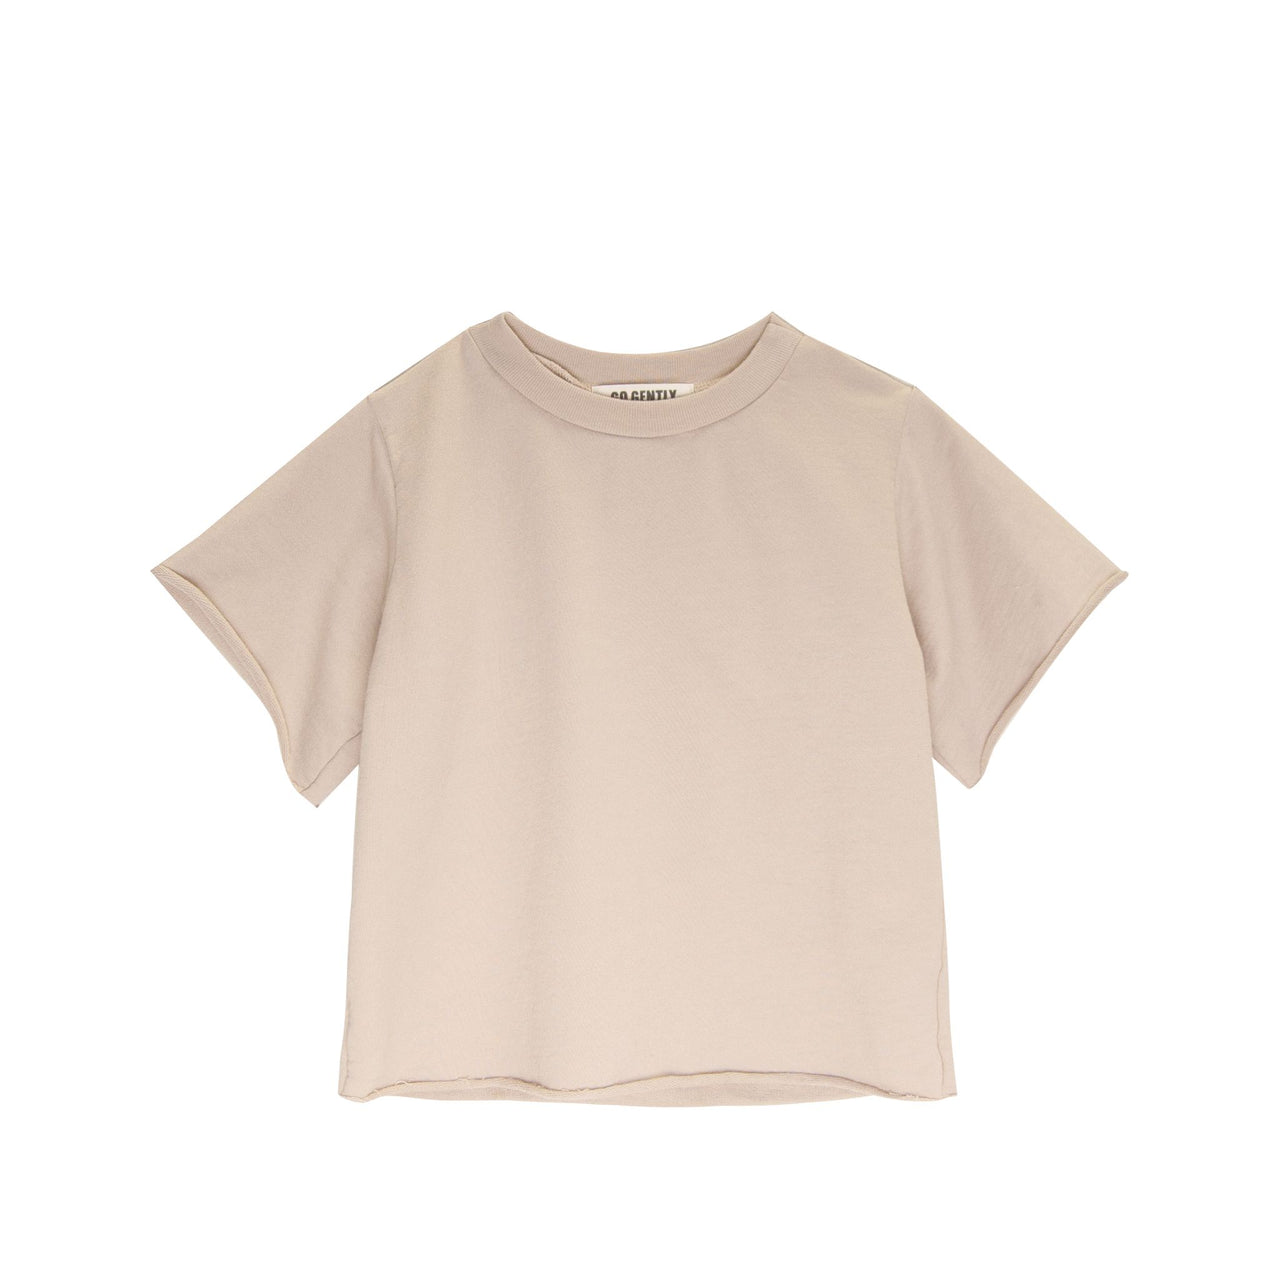 Go Gently Nation French Terry Tee, Sand Solid